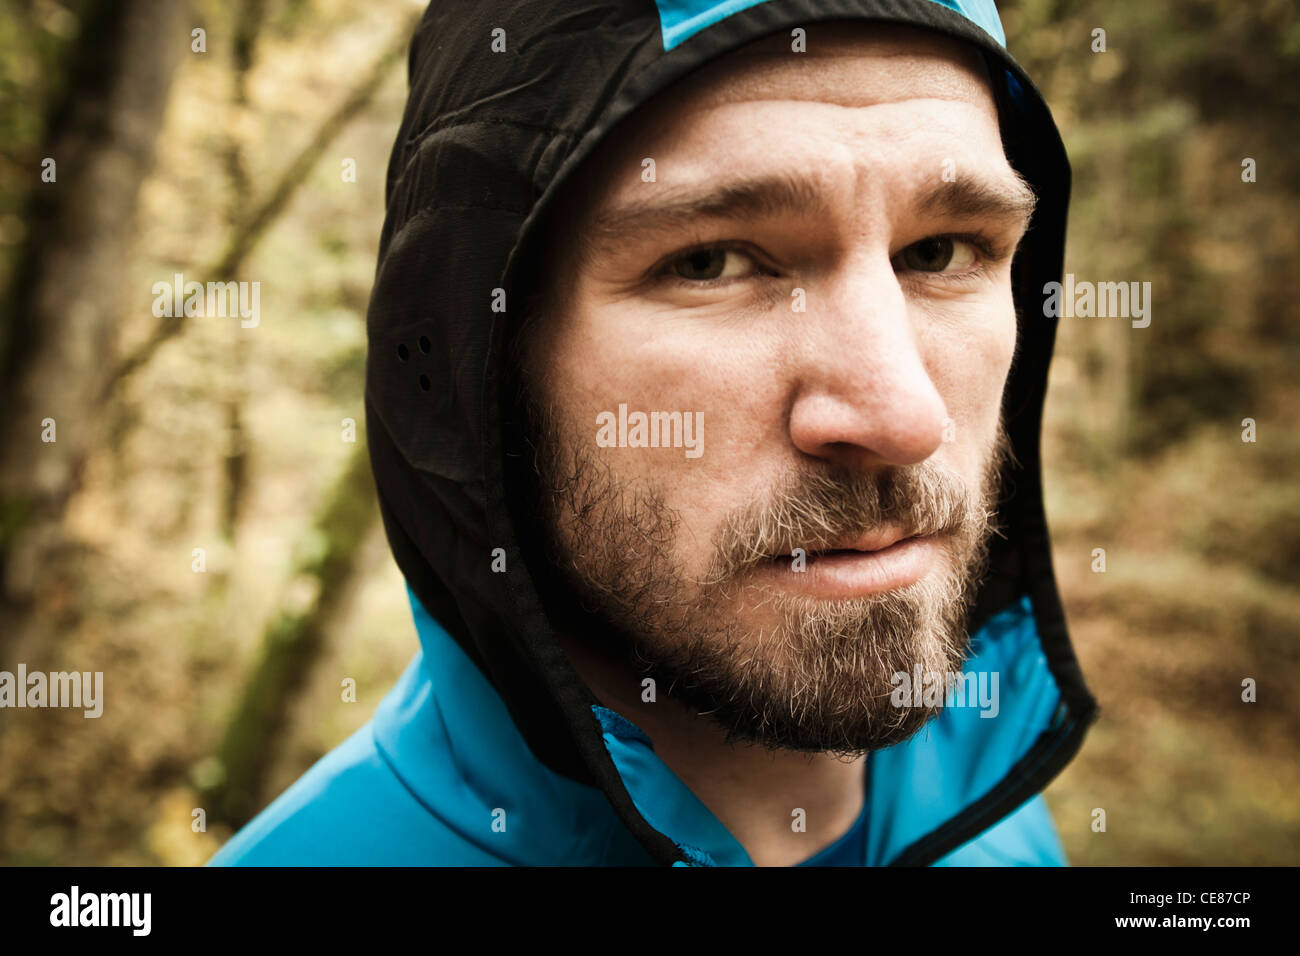 Portrait of a bearded young man wearing a hooded running jacket. Stock Photo